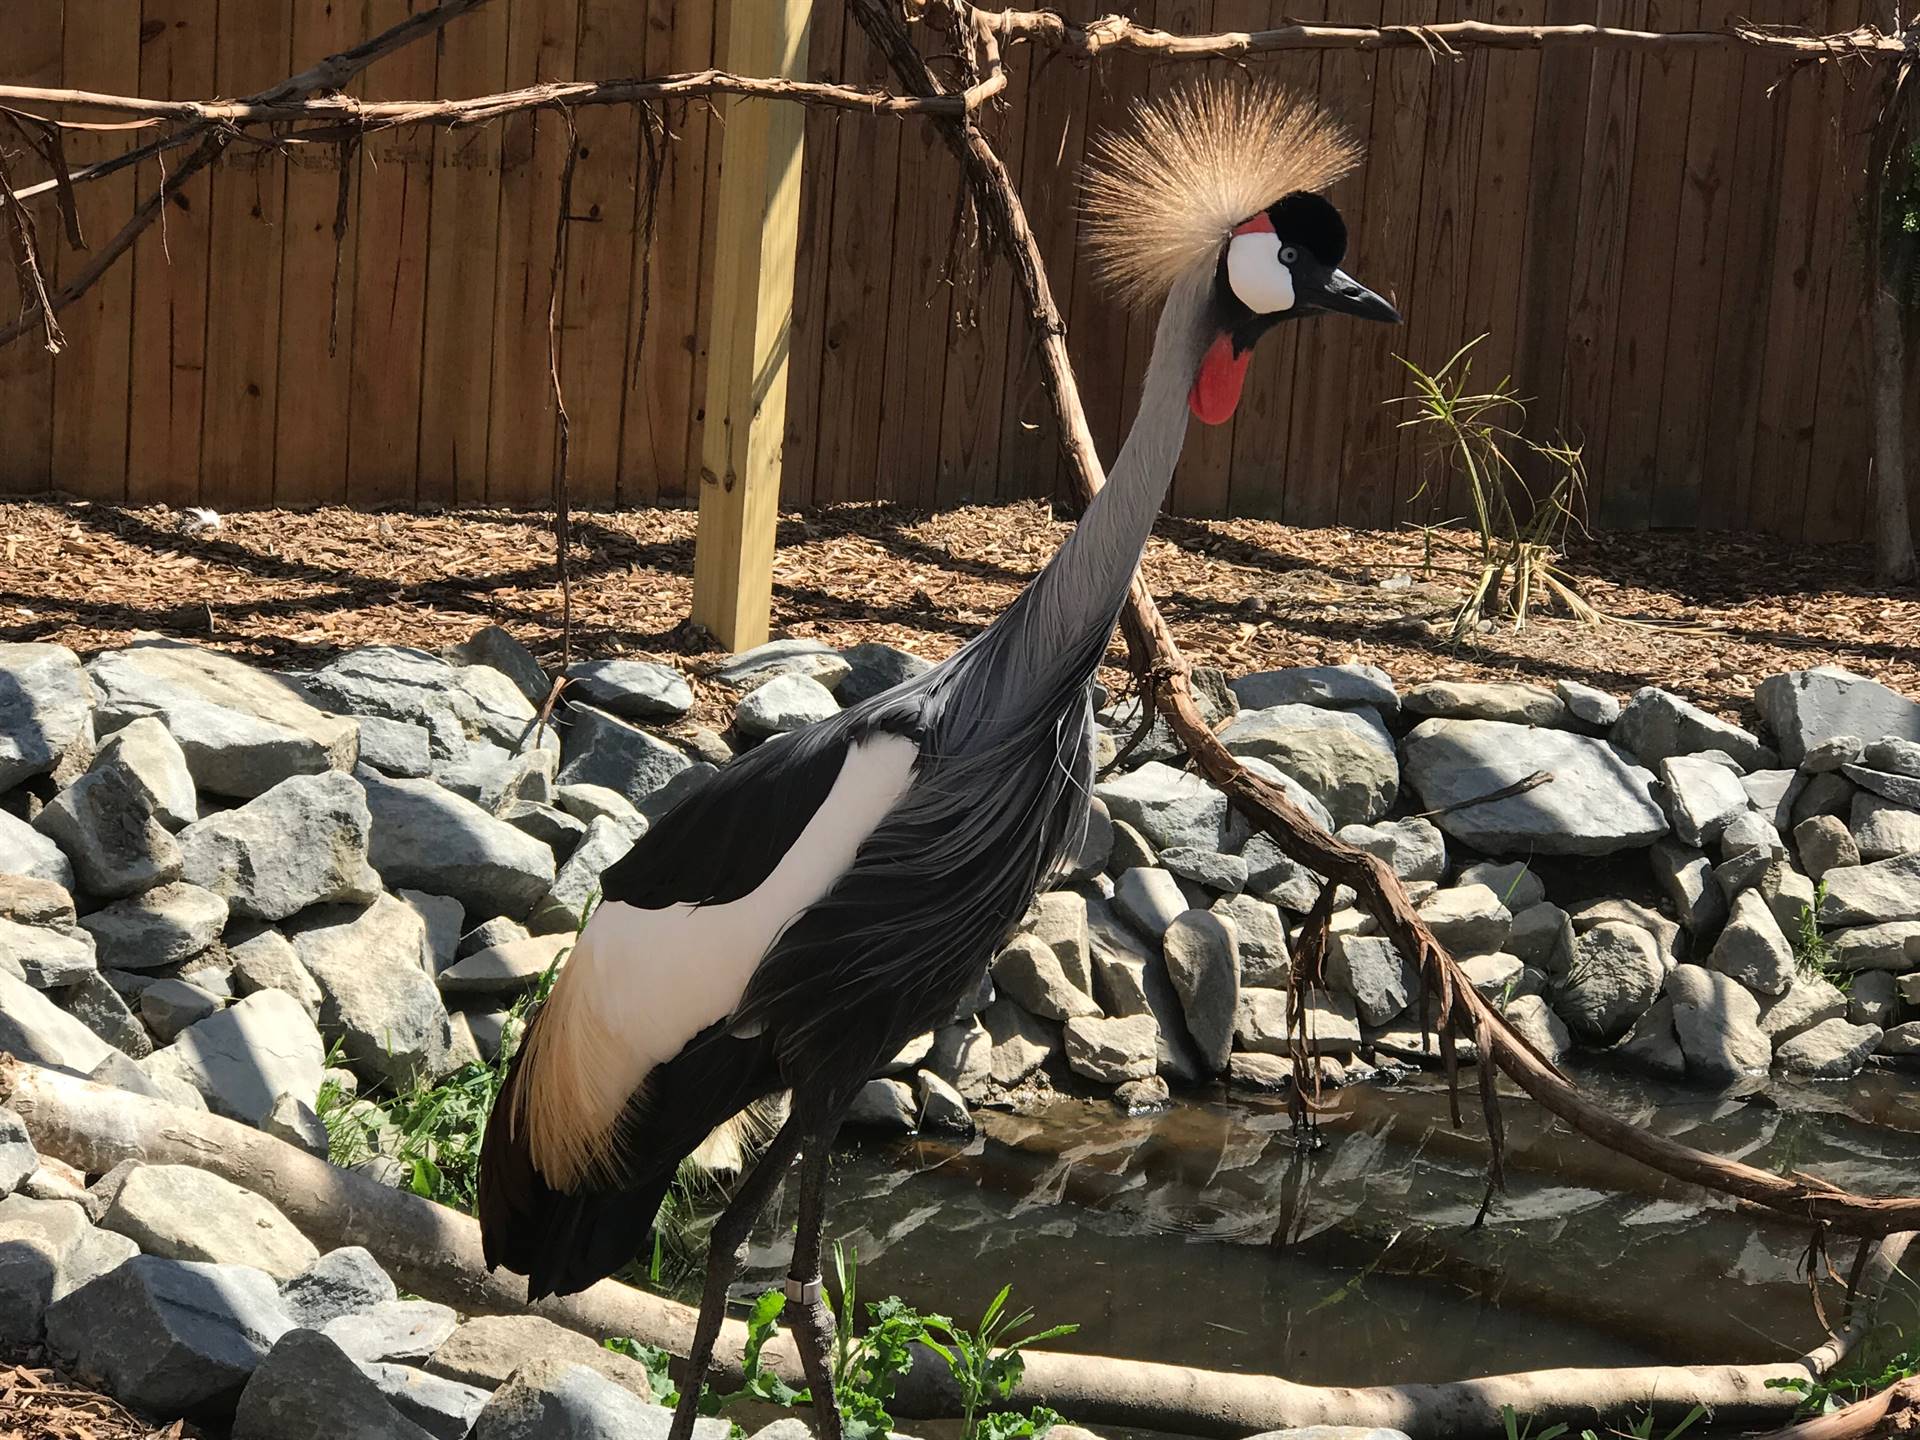 What kind of bird is this?